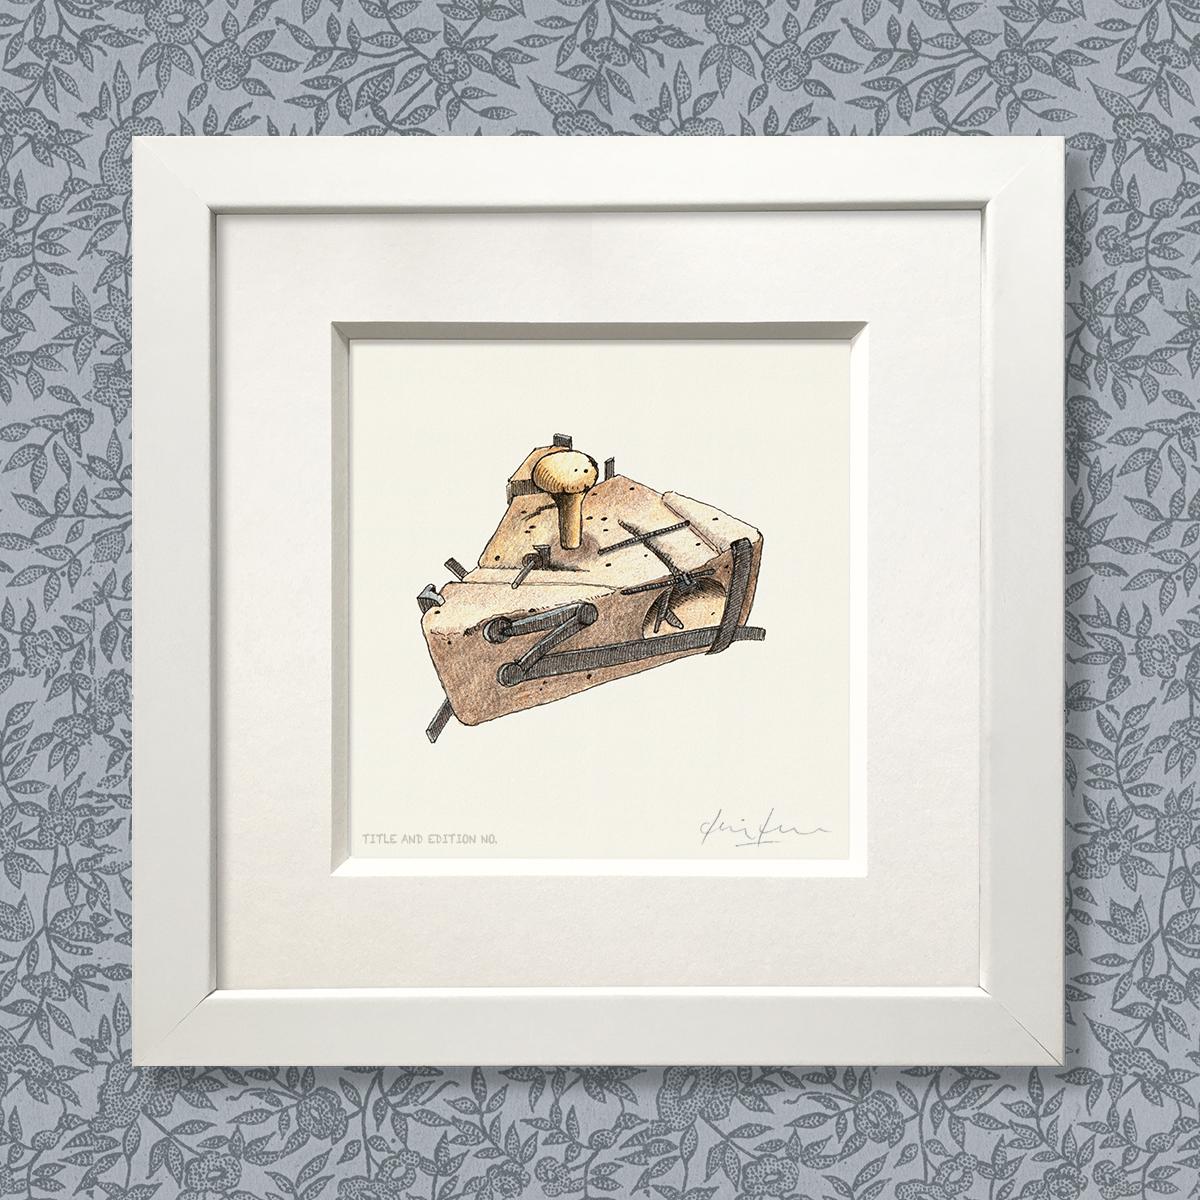 Limited edition print from pen & ink and coloured pencil drawing of an old mousetrap in a white frame